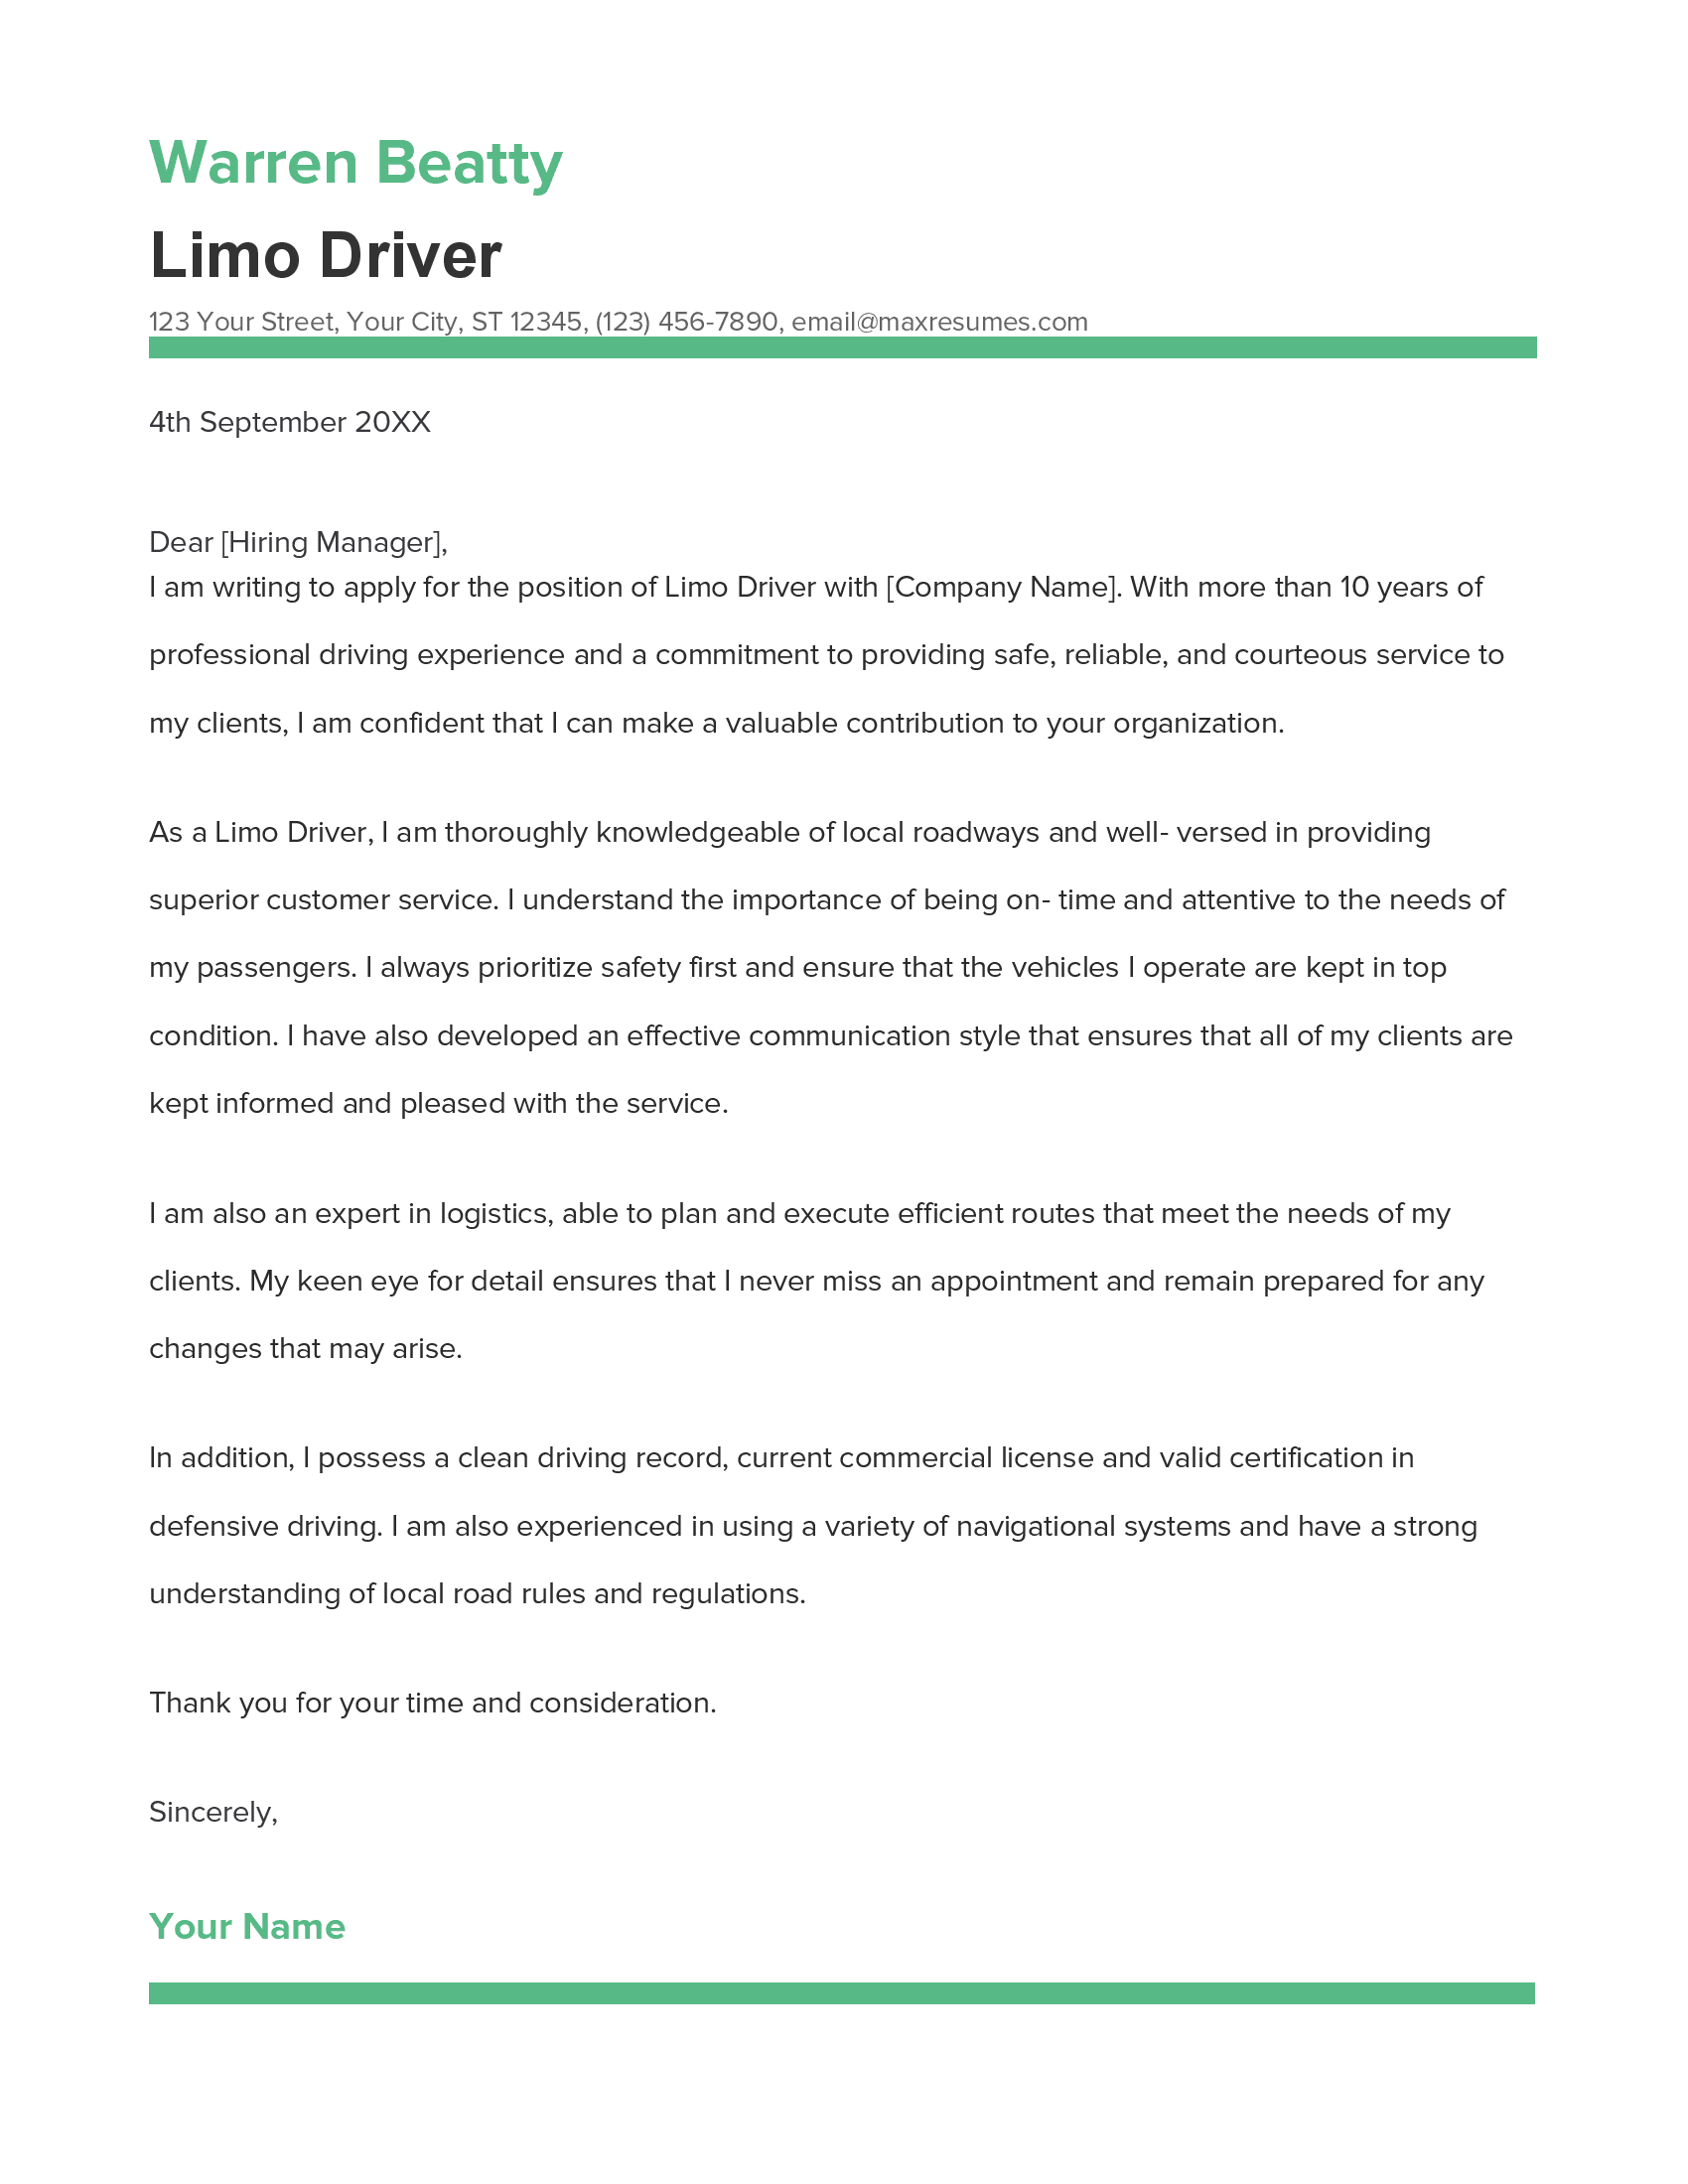 Limo Driver Cover Letter Example